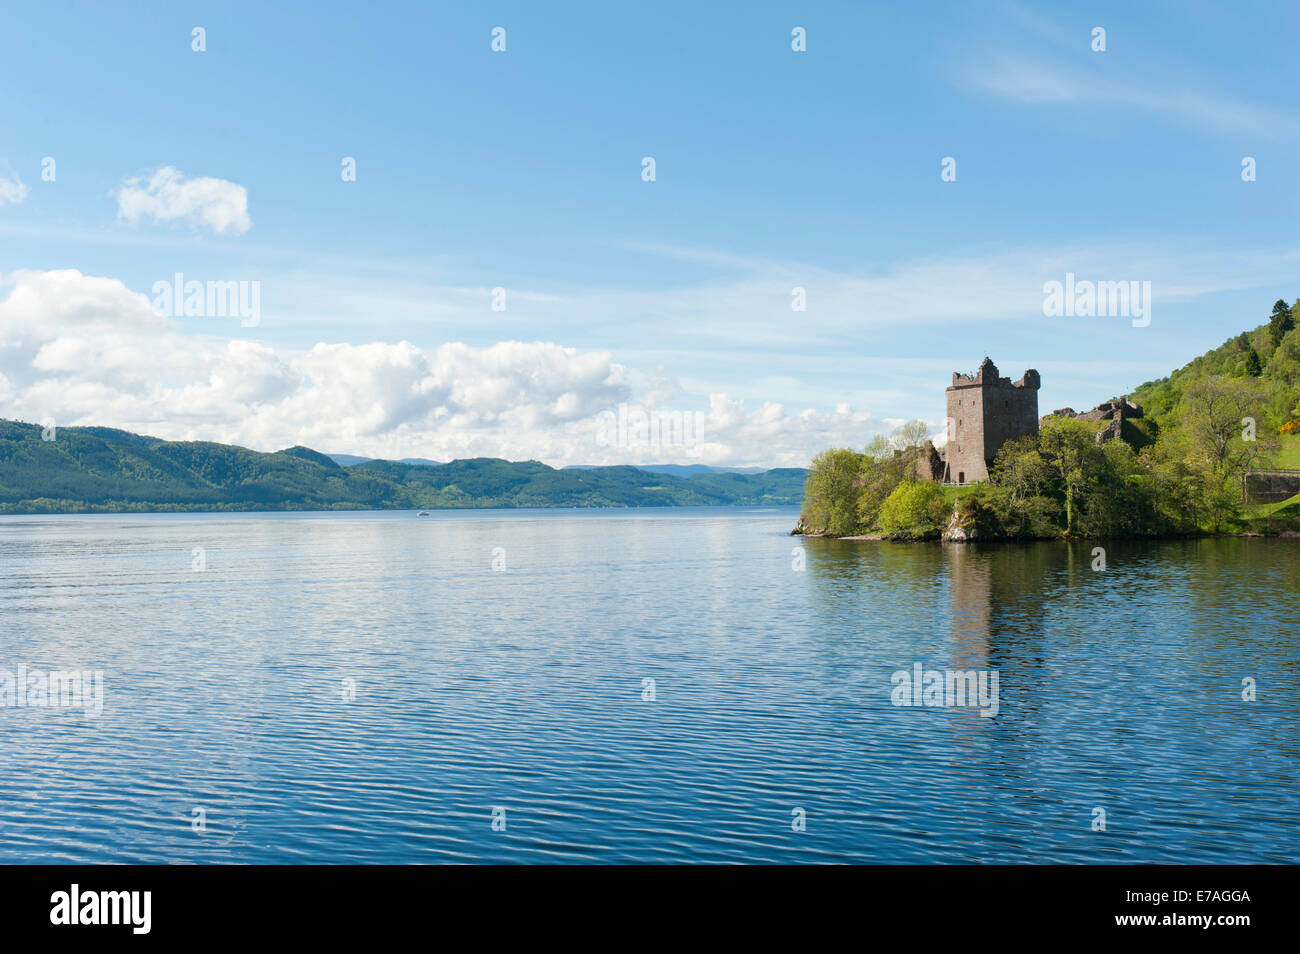 Tower of the ruins of Urquhart Castle on the banks of Loch Ness, near Drumnadrochit, Scottish Highlands, Scotland Stock Photo